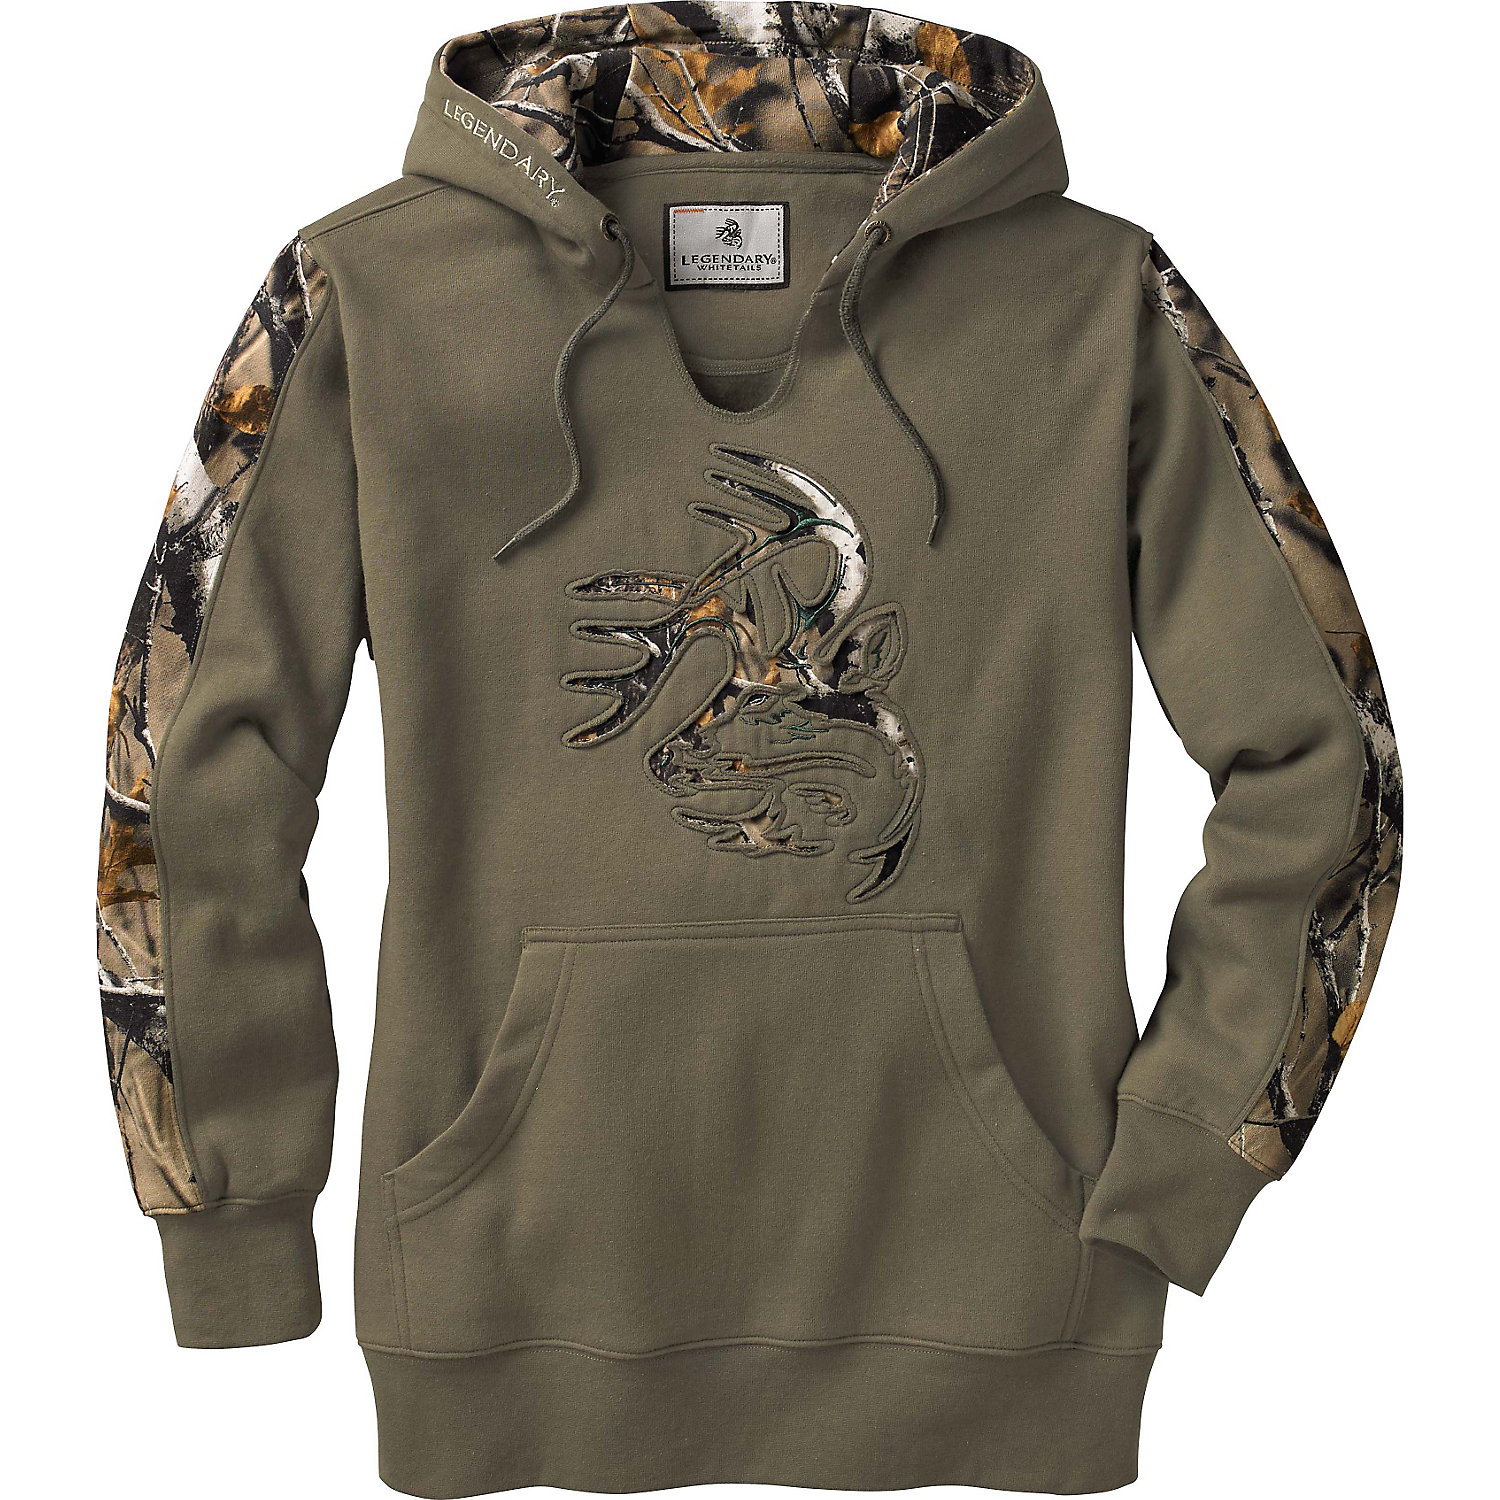 Legendary Whitetails Ladies Outfitter Hoodie | eBay